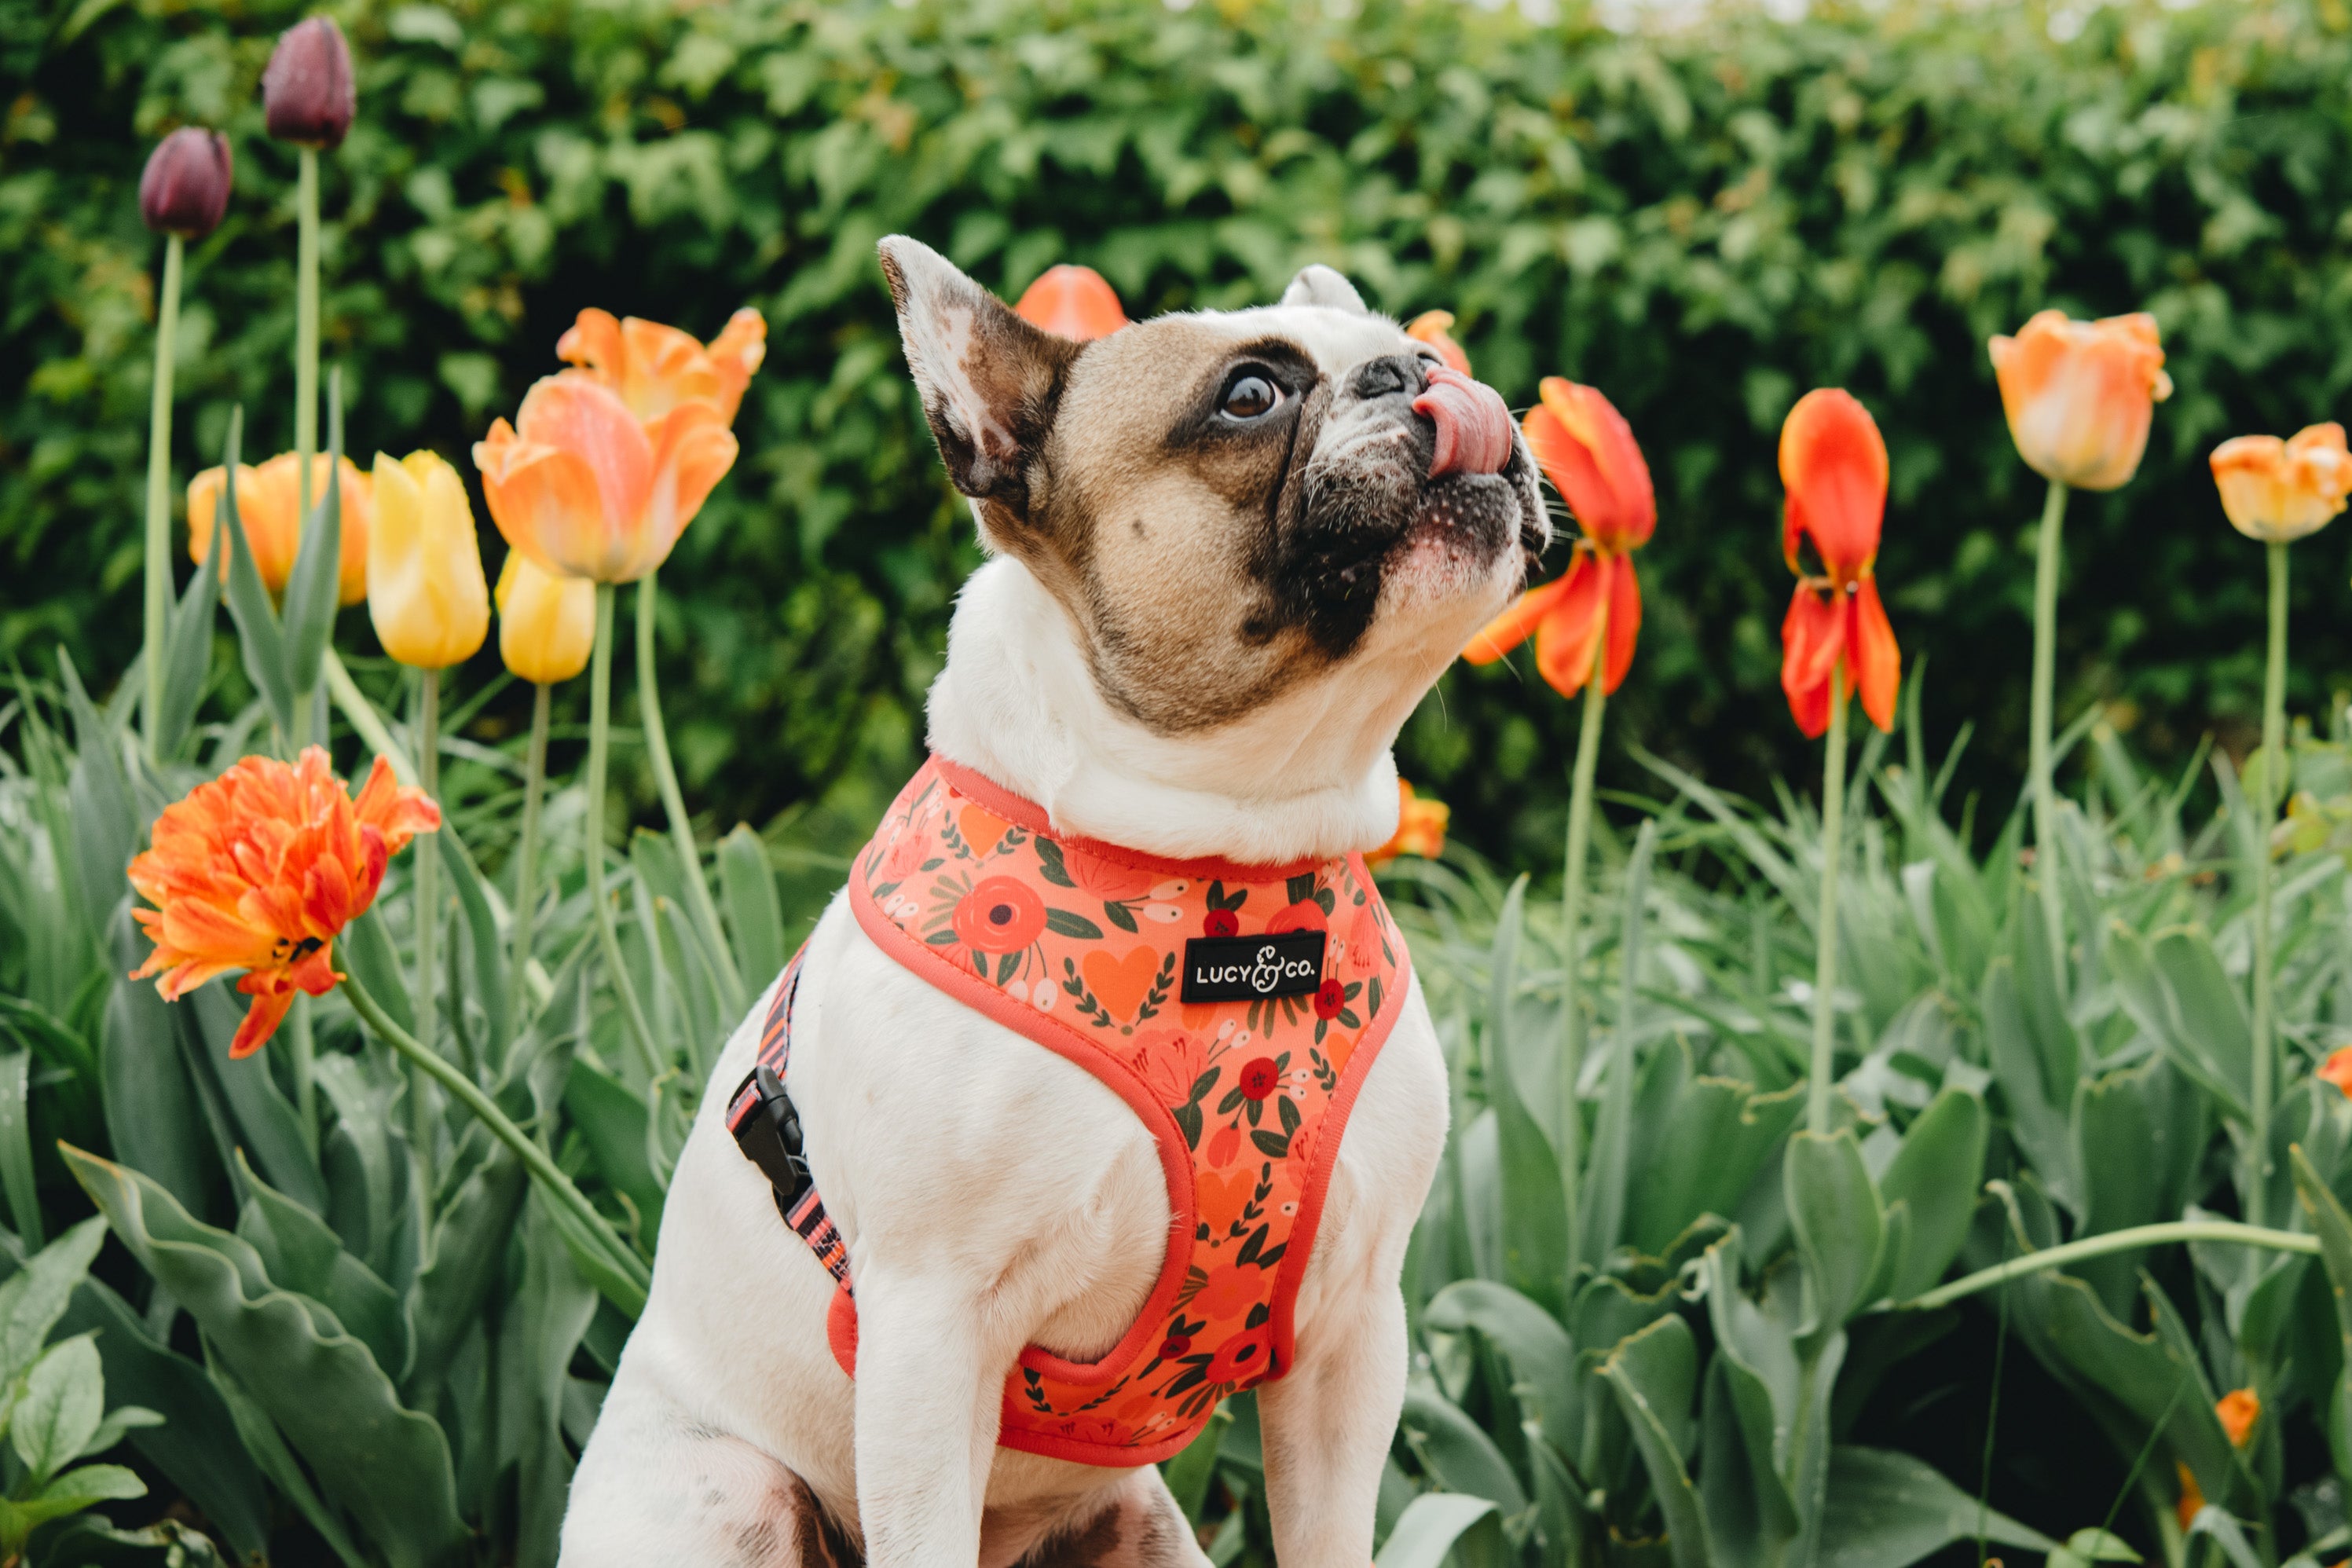 Cute Matching Dog Harnesses & Leashes | Lucy & Co. Dog Gear and Apparel